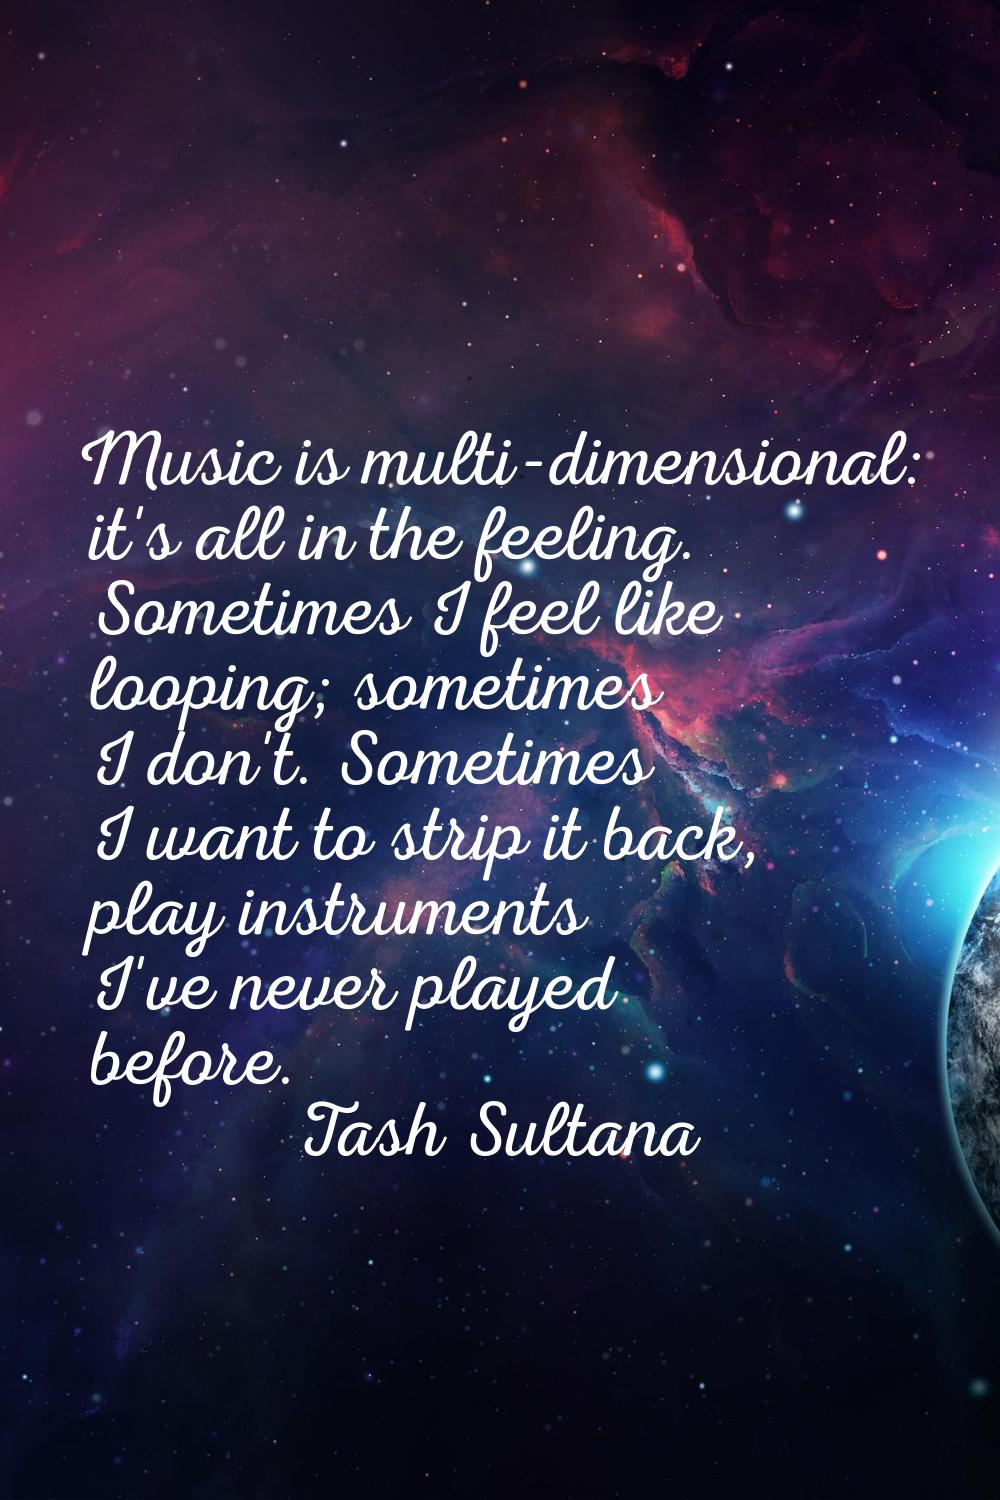 Music is multi-dimensional: it's all in the feeling. Sometimes I feel like looping; sometimes I don